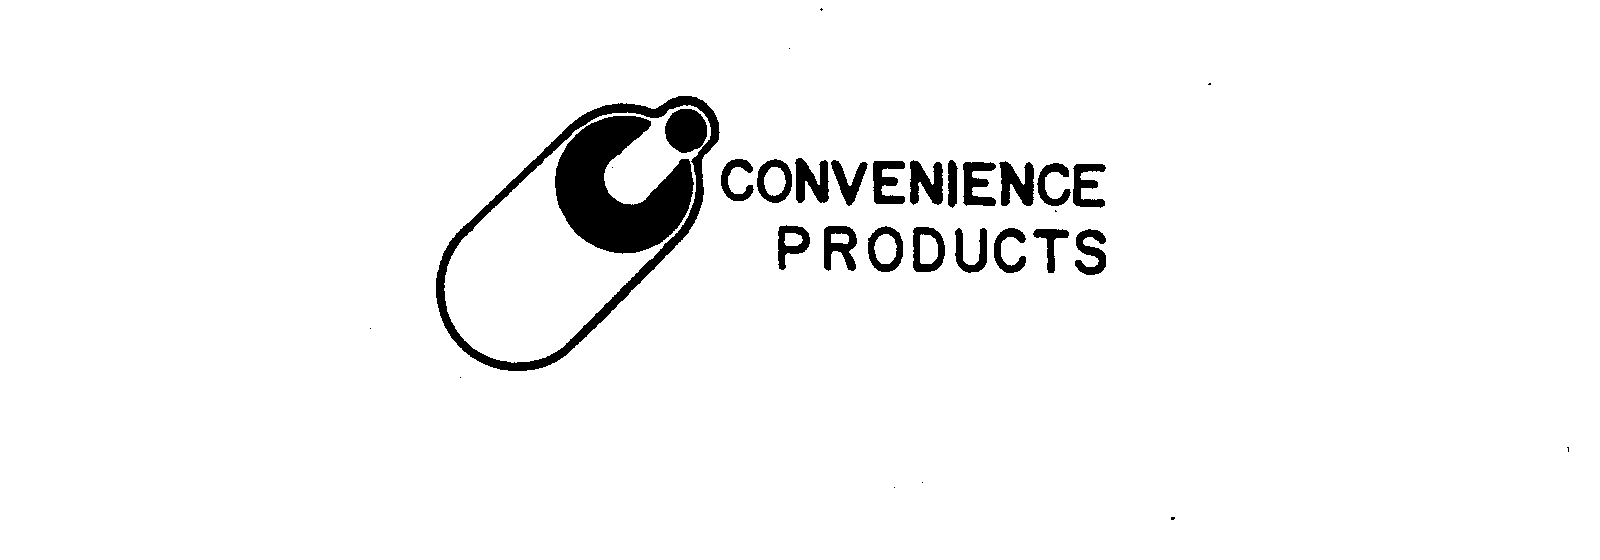  CONVENIENCE PRODUCTS